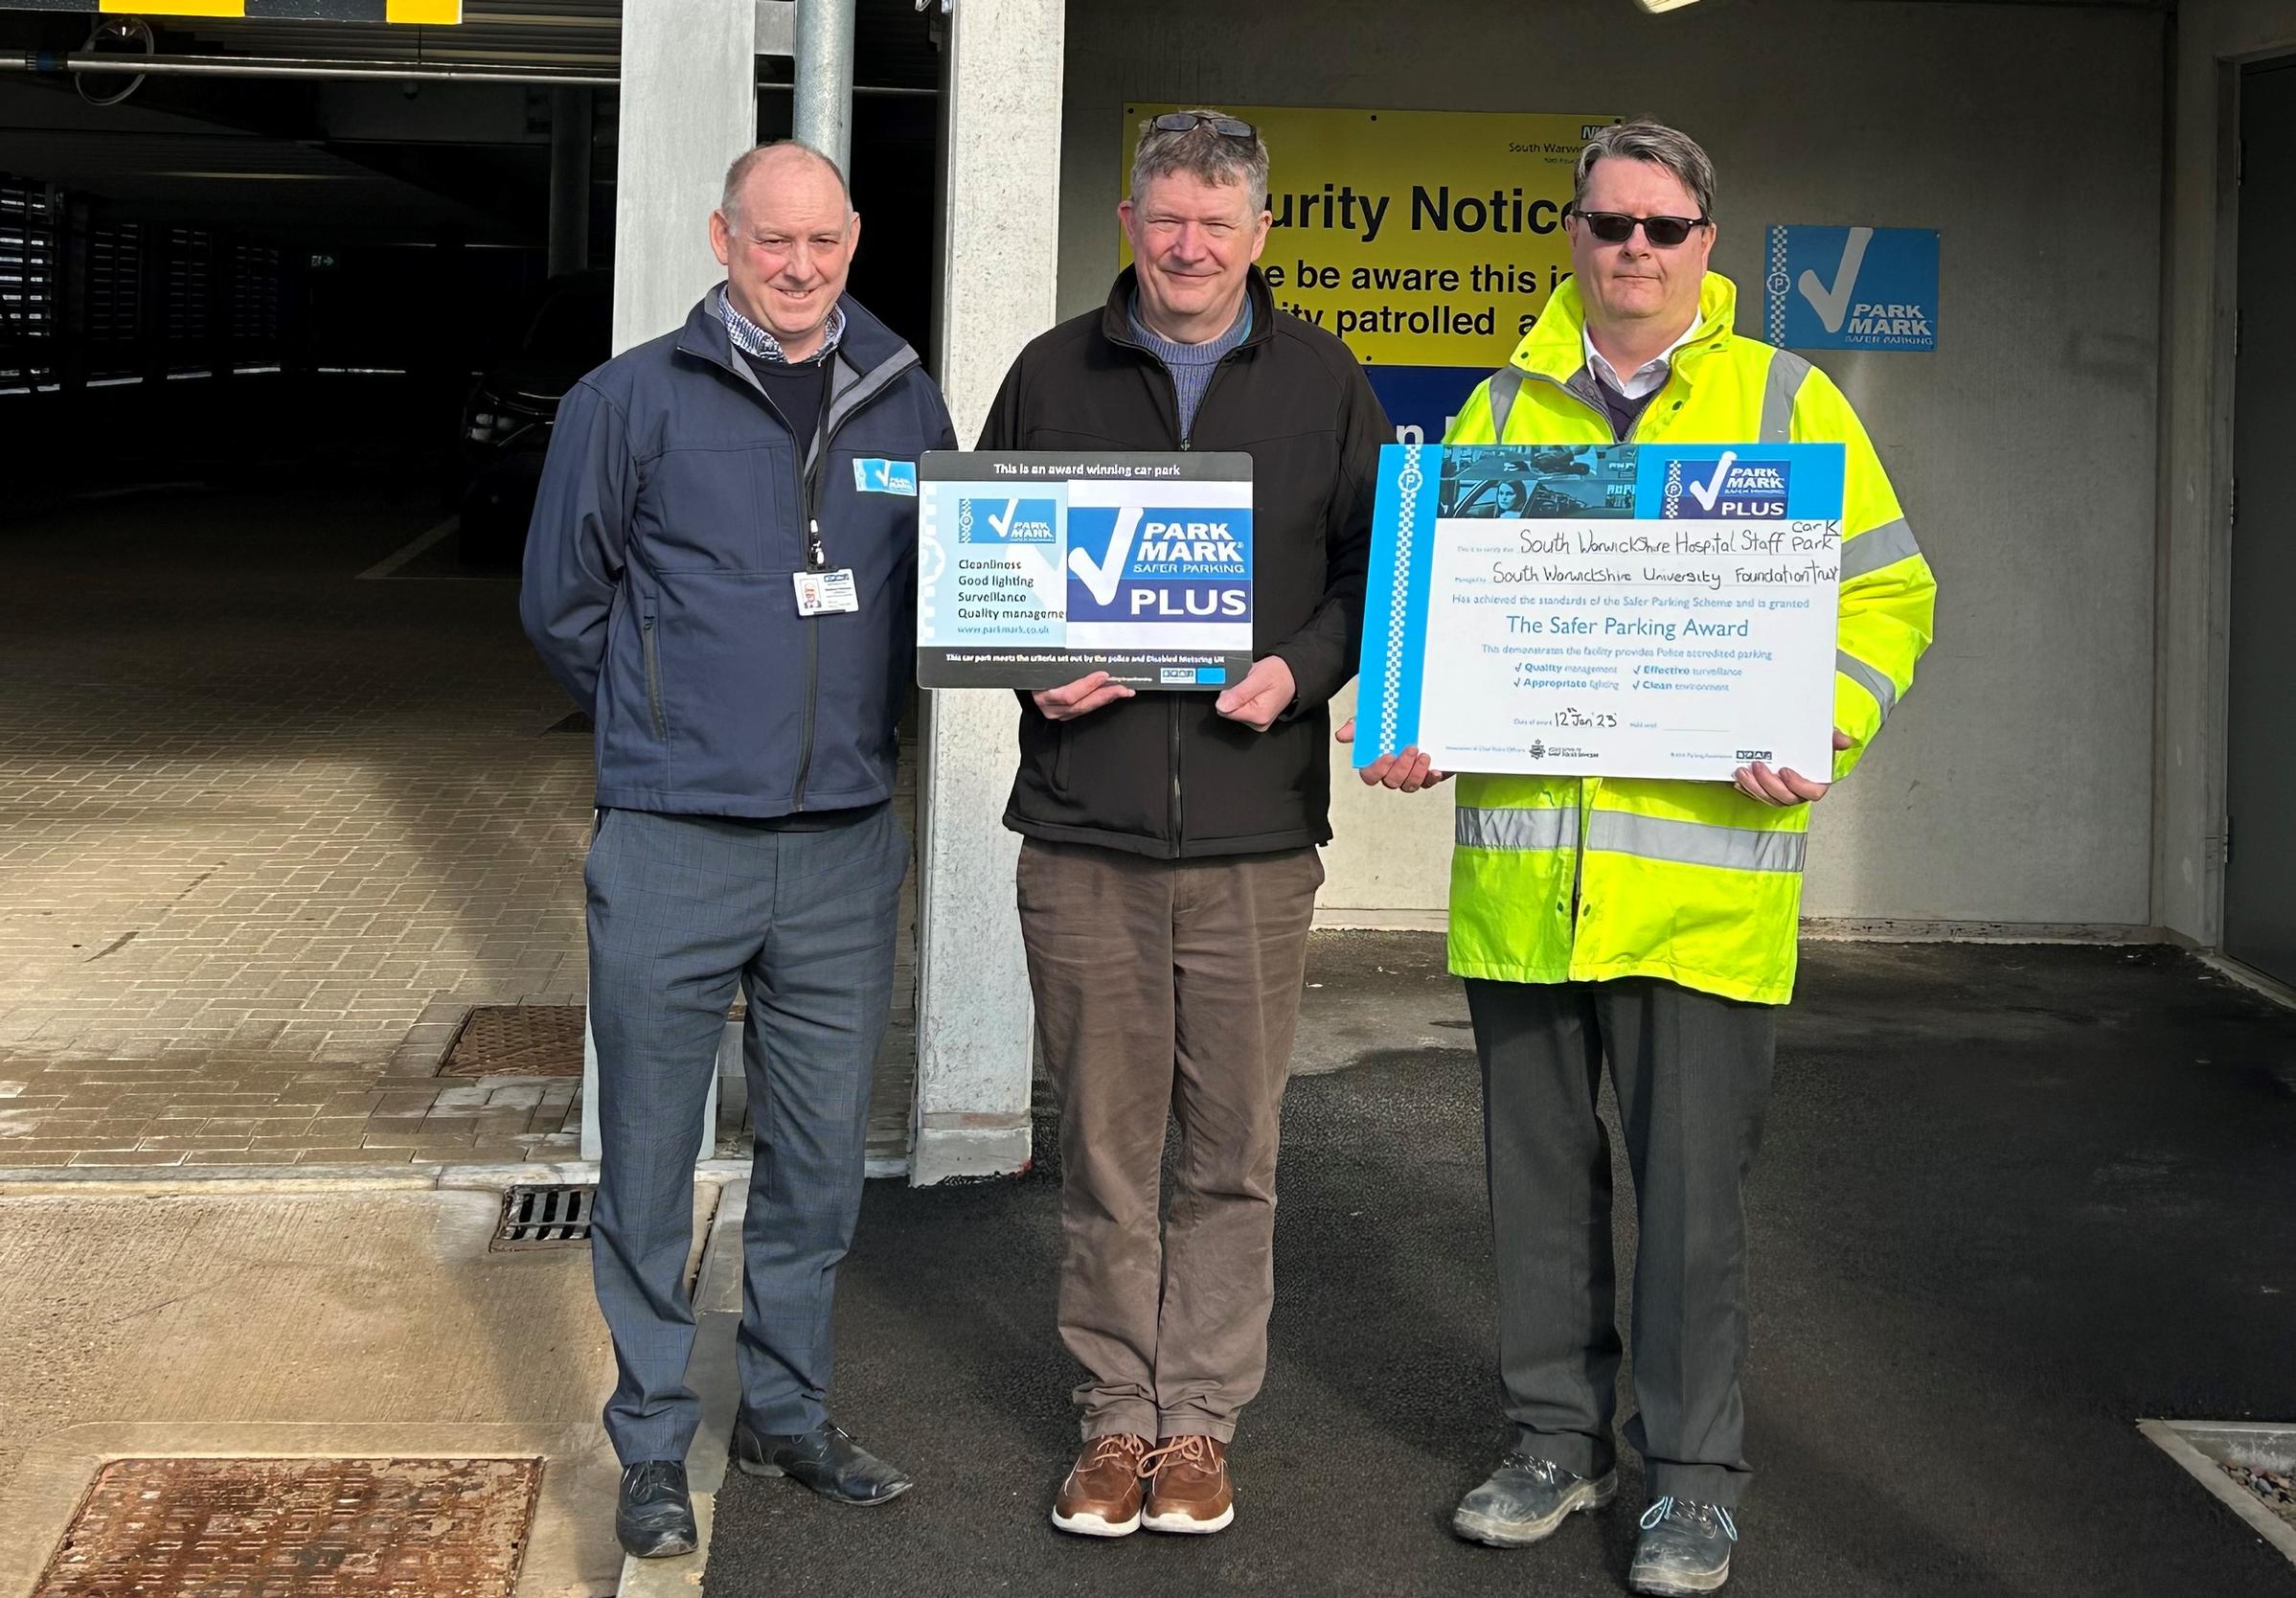 Matthew Robinson, BPA area manager, Sean Mitchell, security and parking services manager and Jeff Bayliss, senior project manager, South Warwickshire Hospital